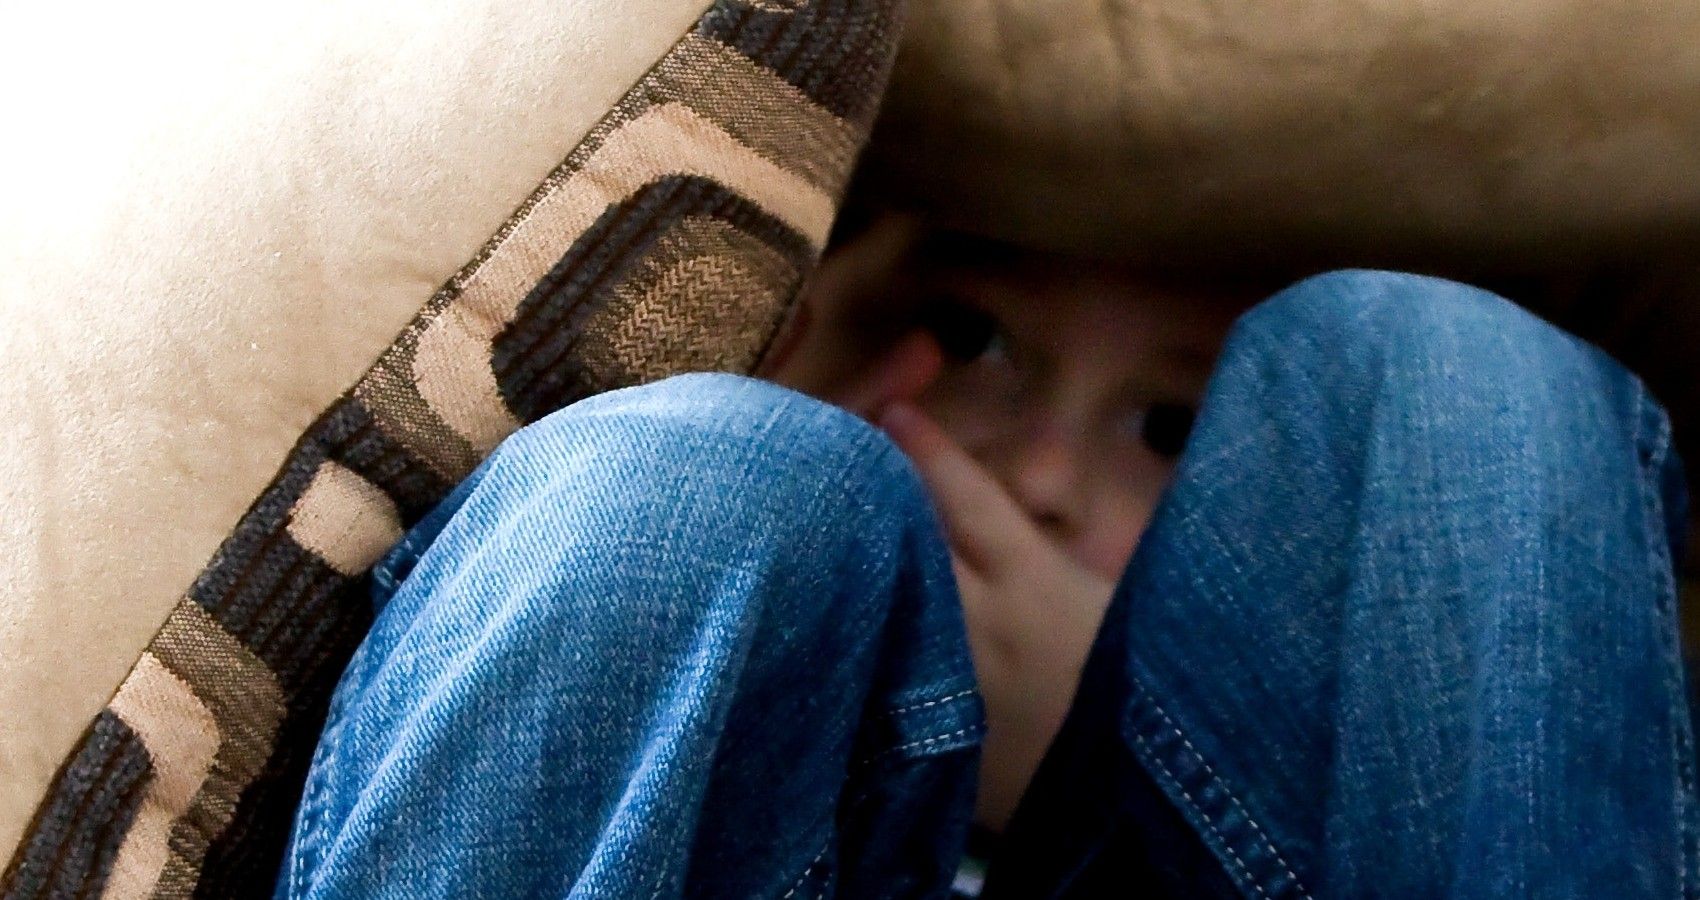 A child sitting on the couch under some pillows